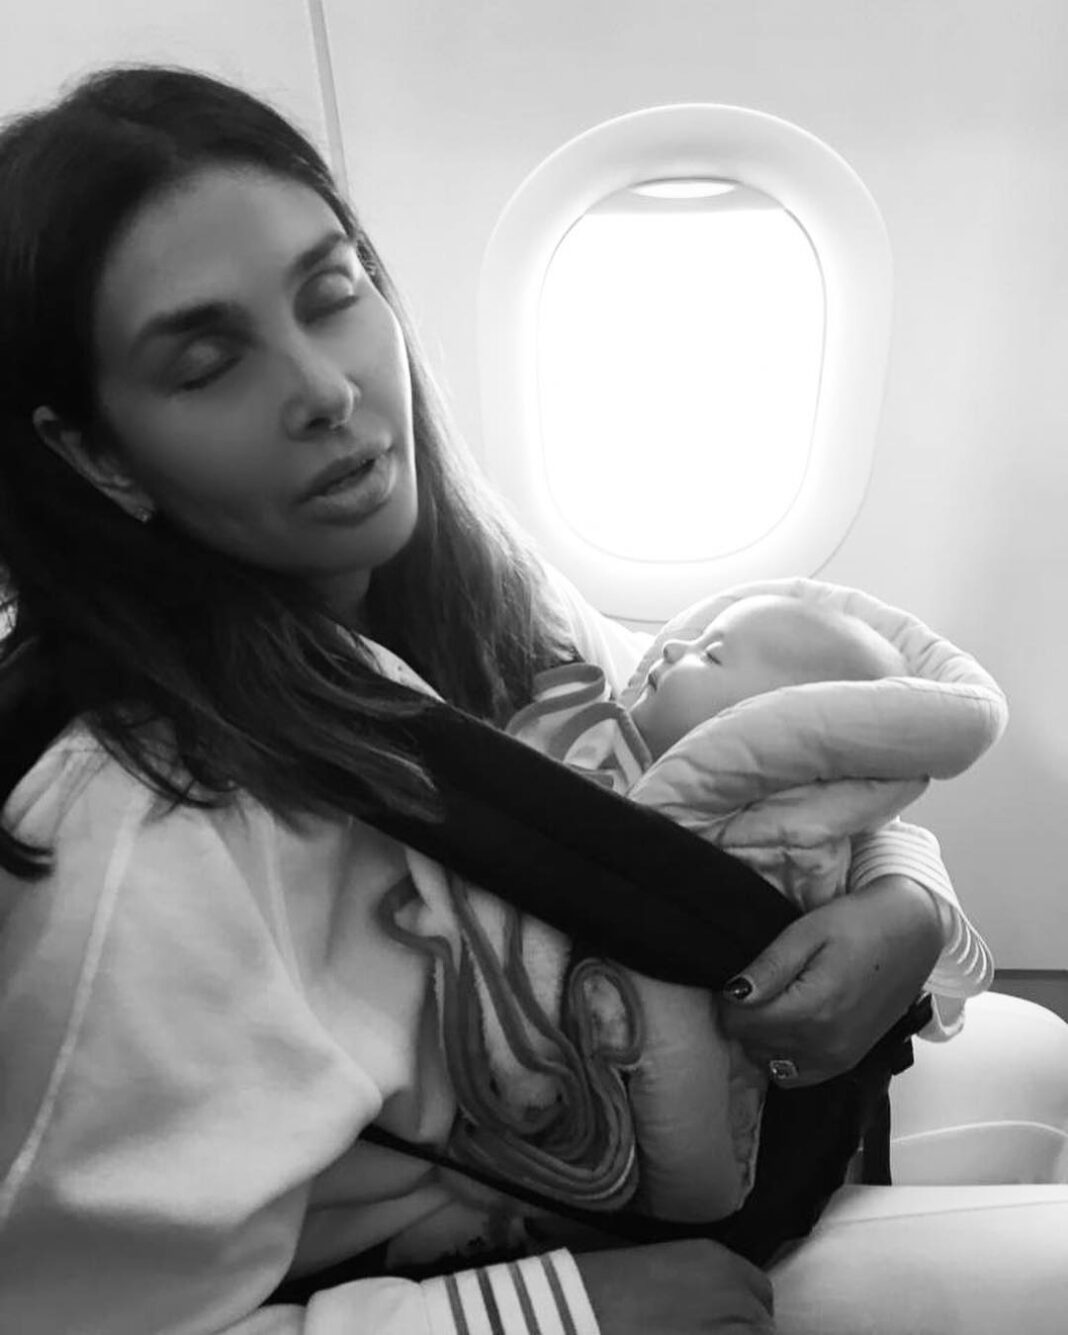 Lisa Ray Instagram - I once was that person: you know the one. The one who grimaced and shot dirty looks at anyone who brought an infant on a plane, then stage whispered: ‘I hope that kid is not sitting close to me. Oh god, can’t they drug their child just a little for the flight?’ Well...today even though I’m fortunate enough to have amazing back up - nannies - and resources - business class - let’s get real about this: travelling with babies is like mixing volatile chemicals in a high school lab: you just never know when the next explosion is coming 💥 #Souffle at six months, are already frequent fliers and I’m proud of it...I, on the other hand, might need a bit more practise flying with this new family configuration. All I know is when we are up in the air and people try to weigh me down with their accusatory looks in the middle of a fussy outburst, we soldier on in the wake of our sweet blessings with a twist of karmic revelation...what goes around comes around. And: ‘my baby is six months old. Don’t give me that look! Keep your headphones on and watch a movie, dude.’ #motherhood #therealstory